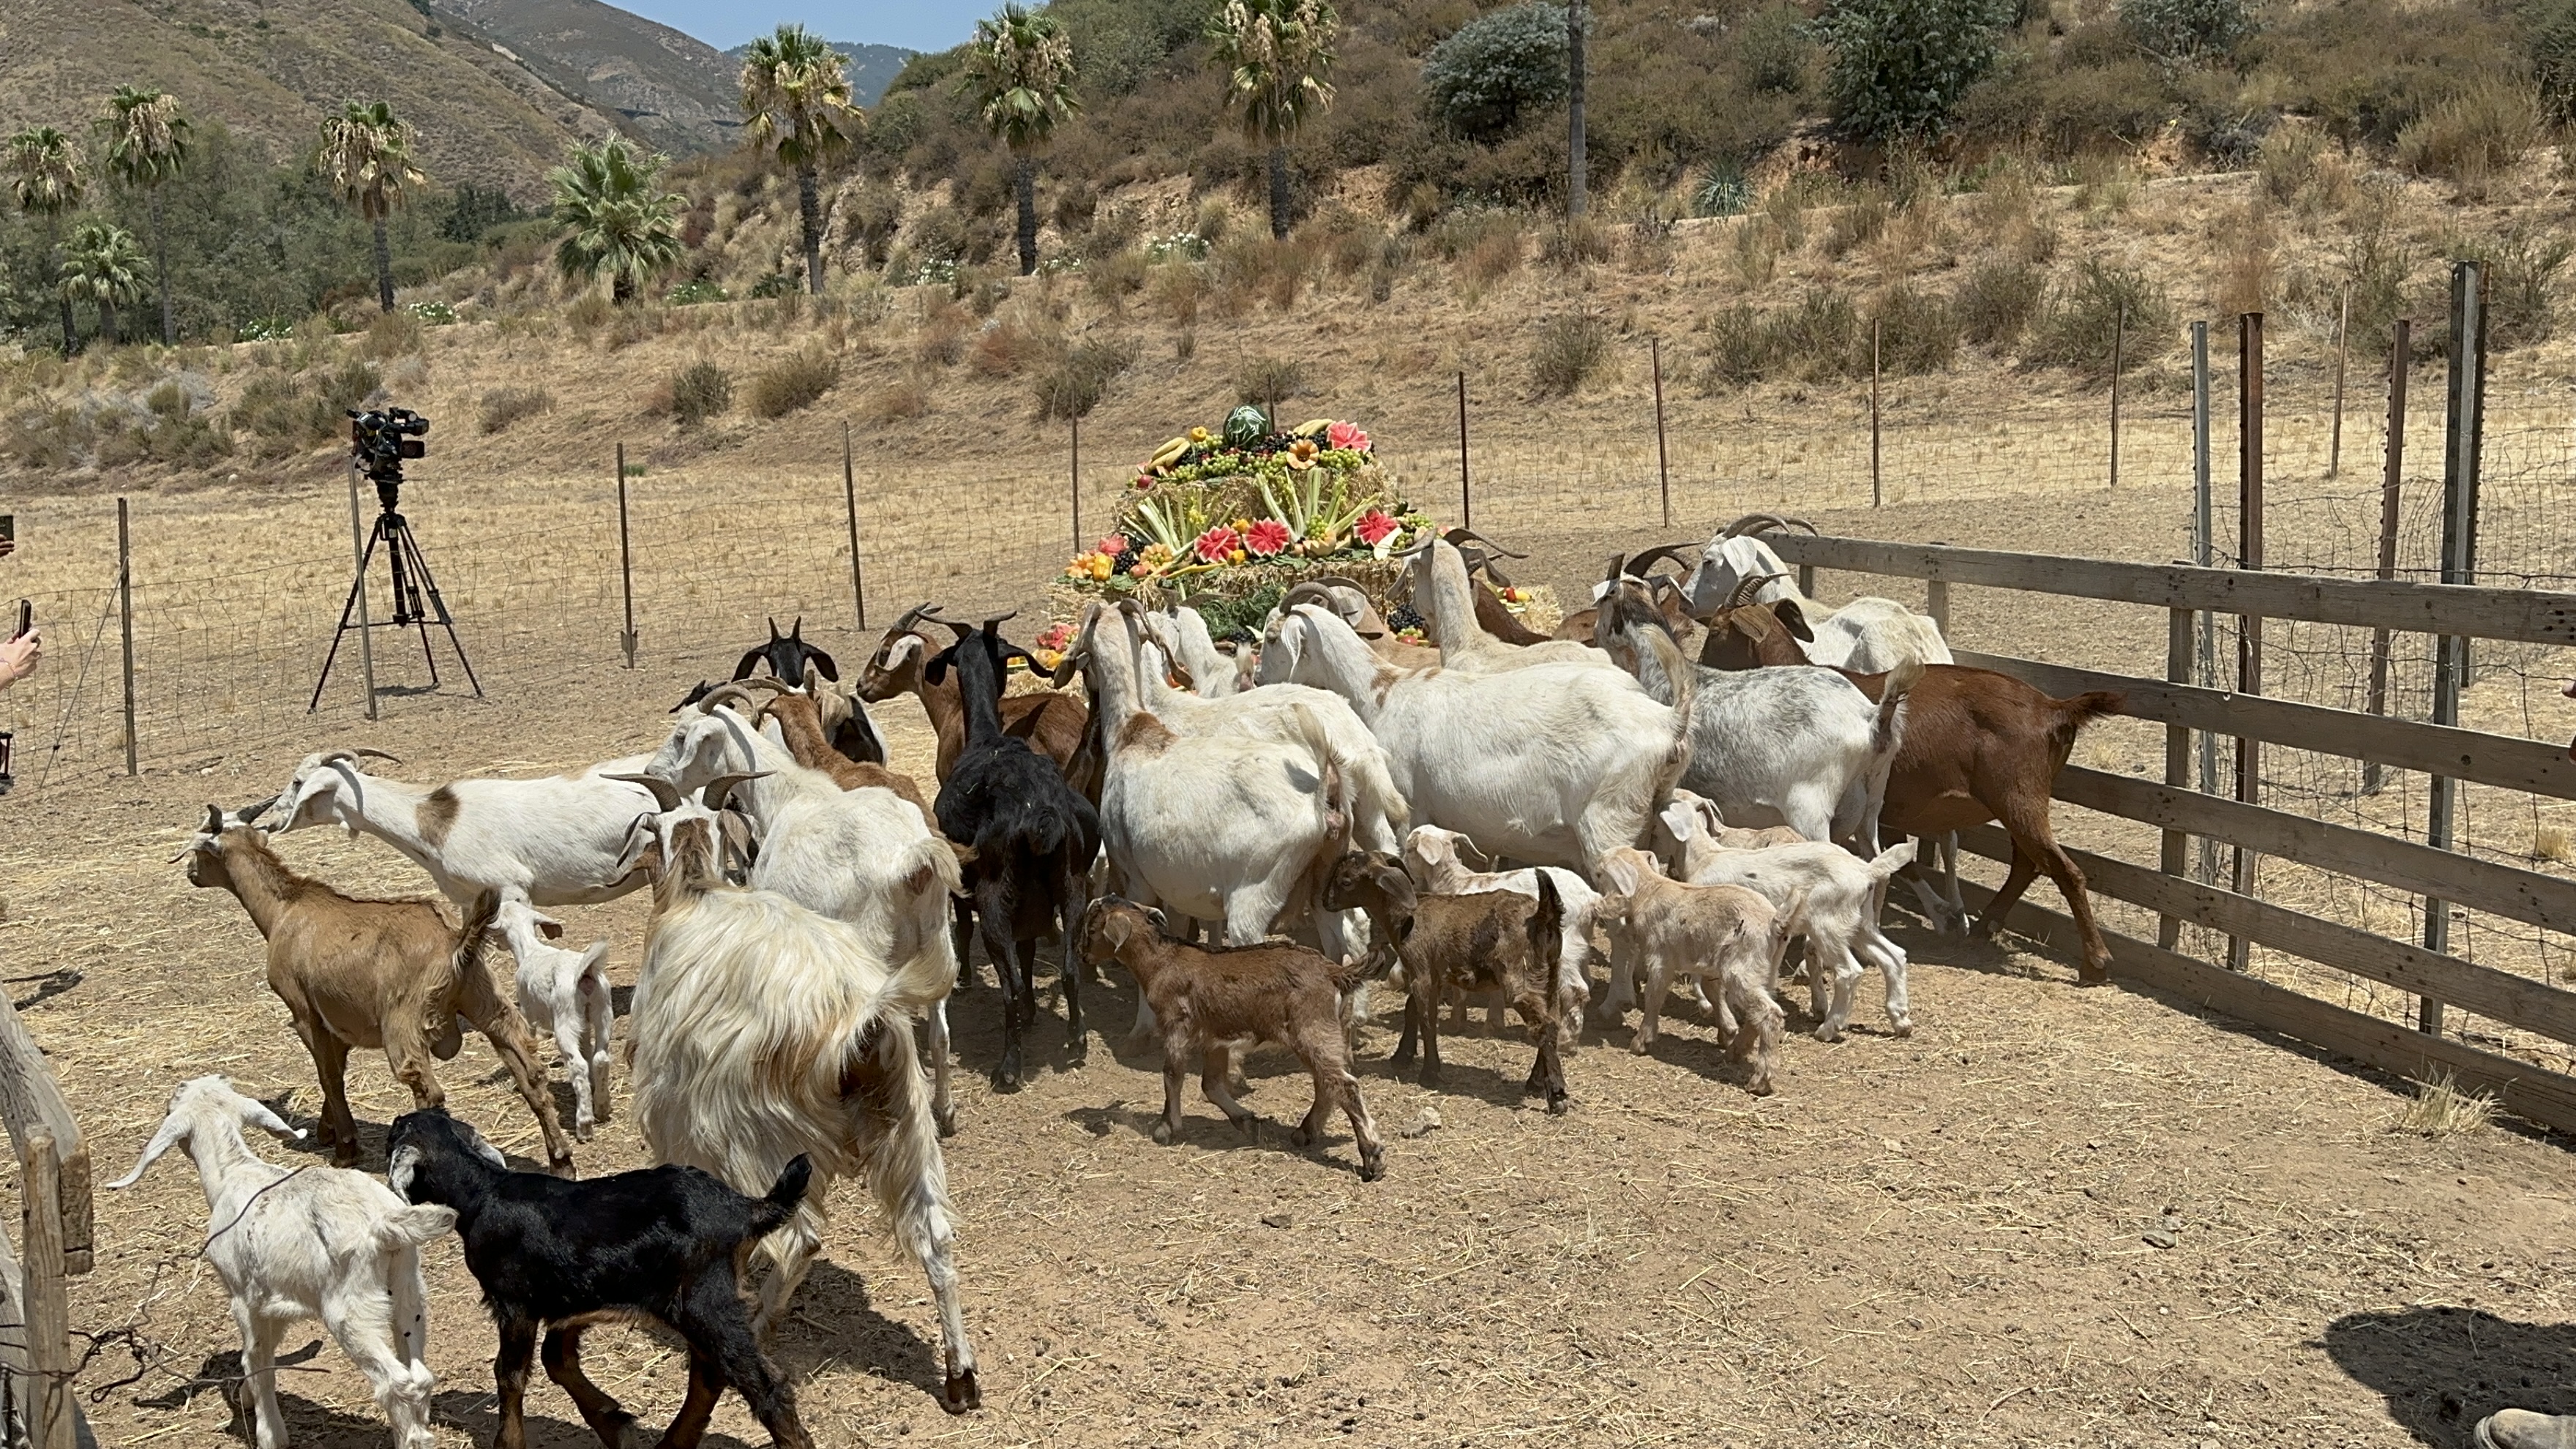 Mother and baby goats gather around for a treat of fresh fruits and veggies before going to remove more brush